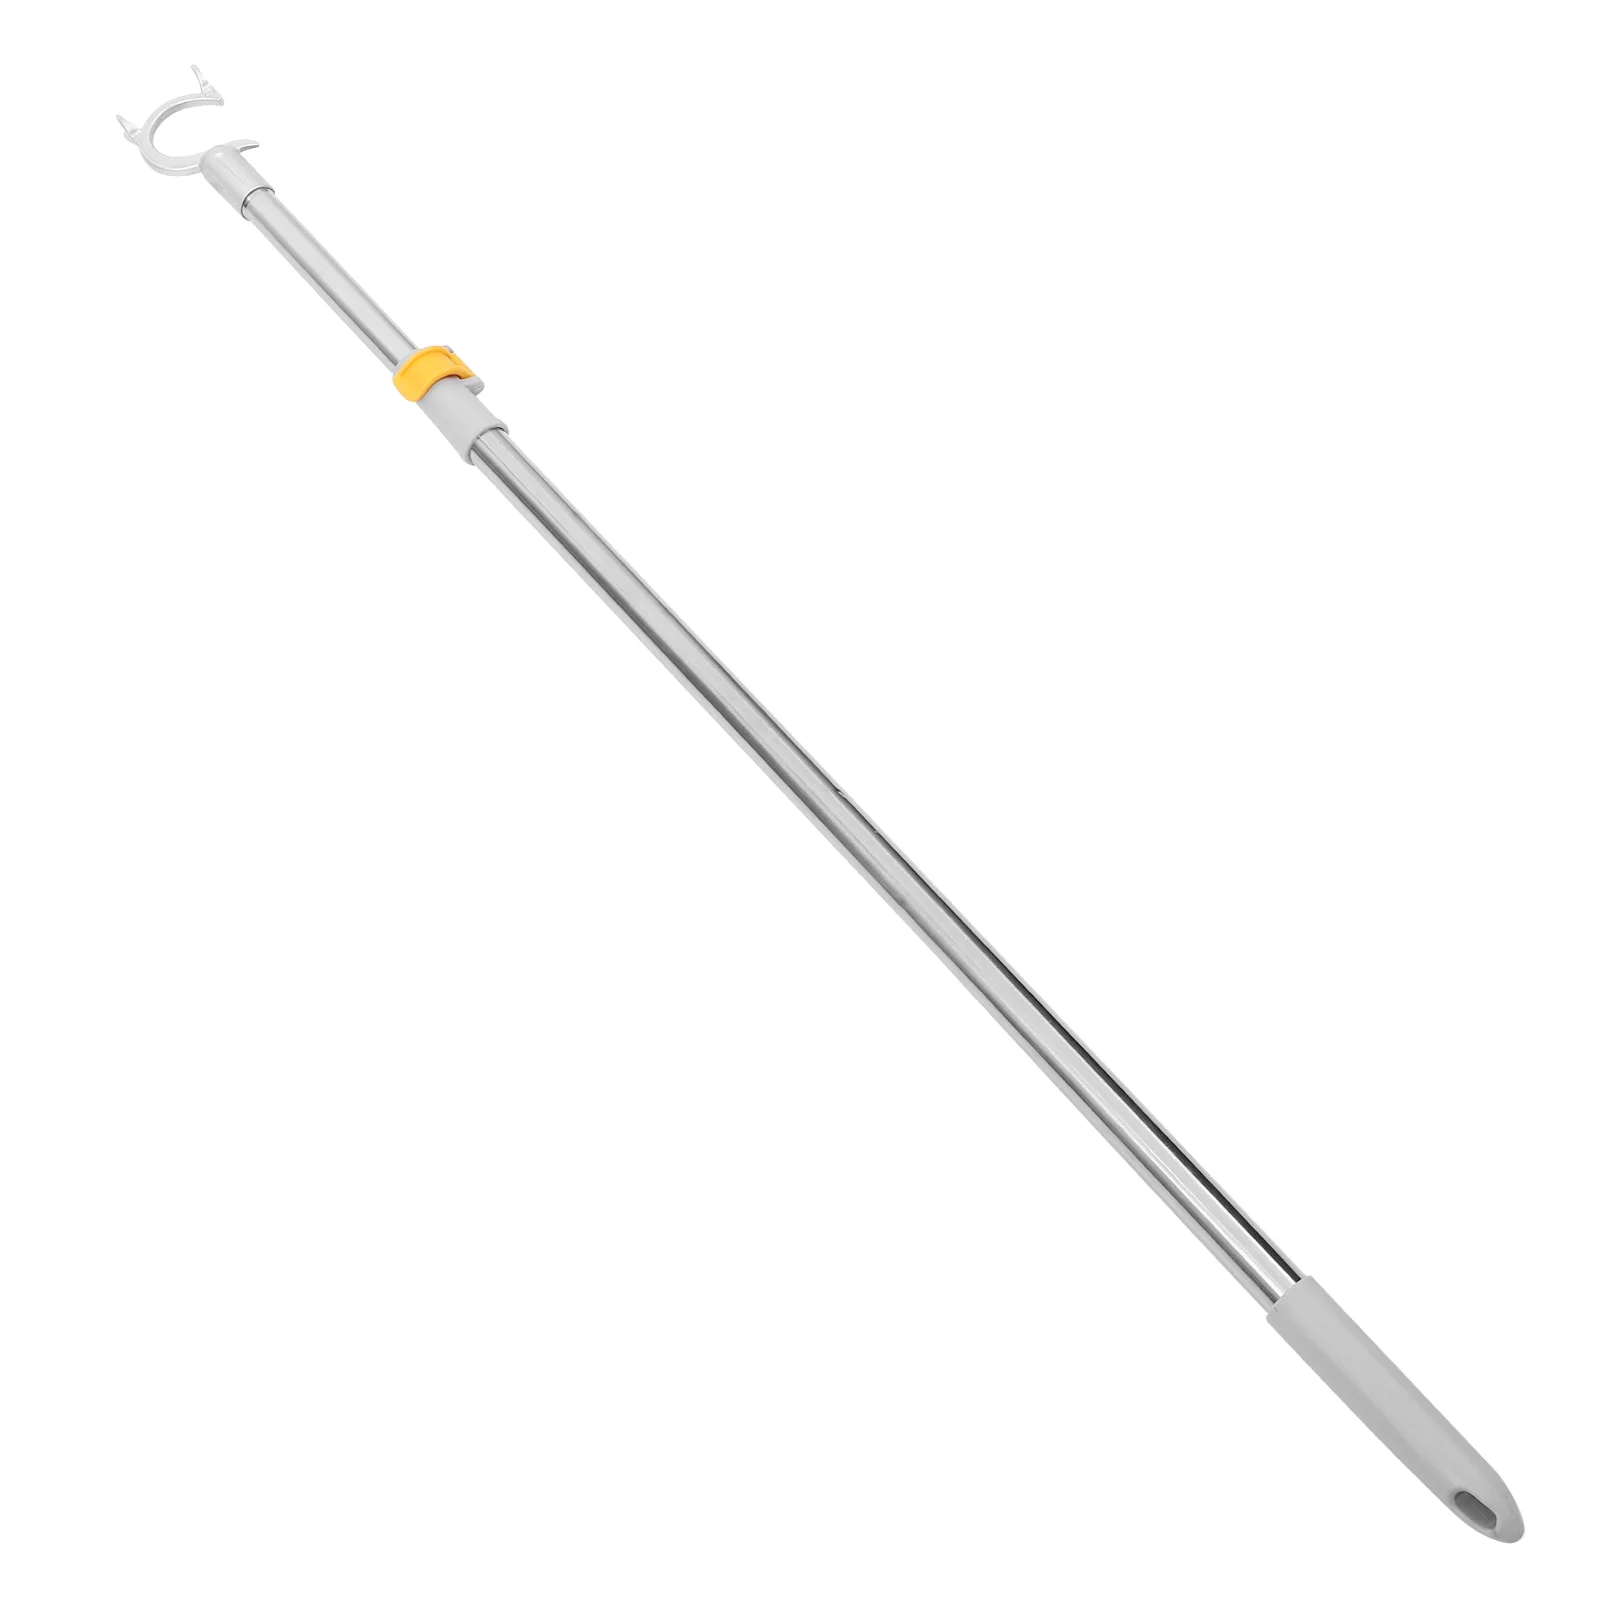 

Telescopic Hanger Retractable Clothing Rack Clothes Reaching Rod Pole Stainless Steel Clothesline